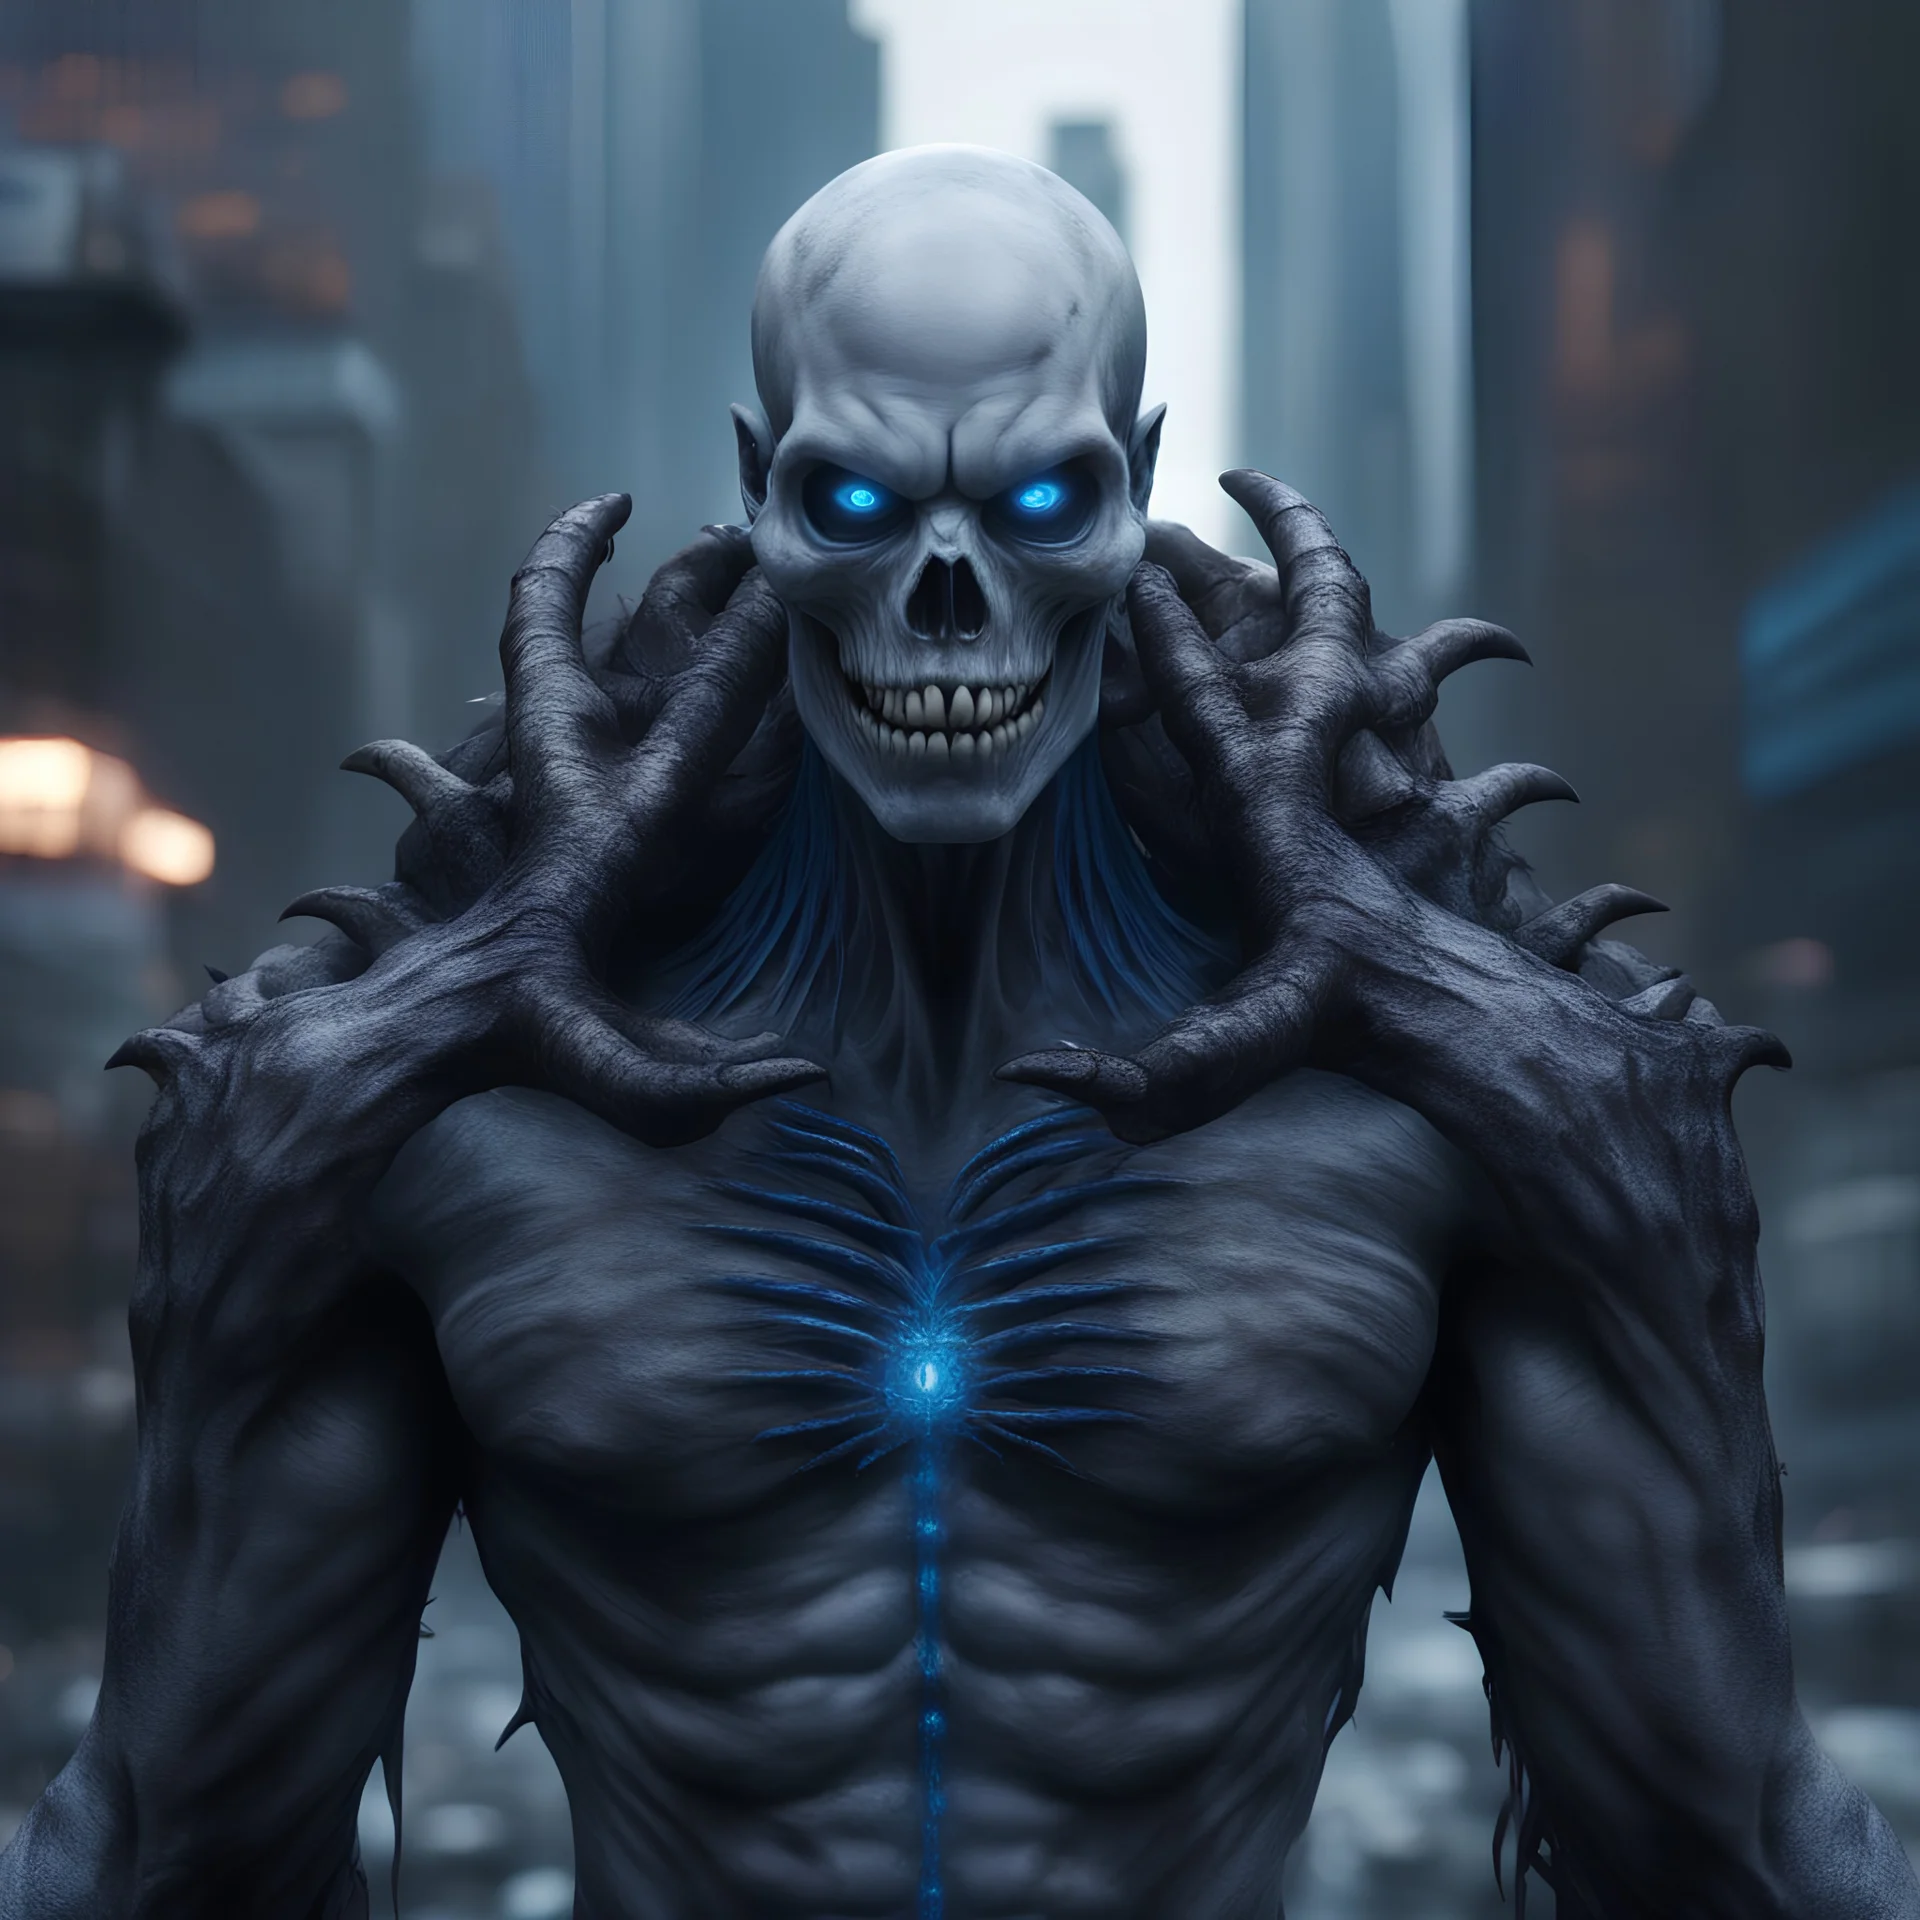 Stunning 4K hyper-realistic sci-fi image of a humanoid male monster with a white skull adorned with large sharp teeth. His black skin is mottled with bright blue neon lines and his piercing black eyes have blue pupils. The creature stands in a dramatic, cinematic setting with a mix of natural and supernatural elements, against the backdrop of the ruined city of New York, anime